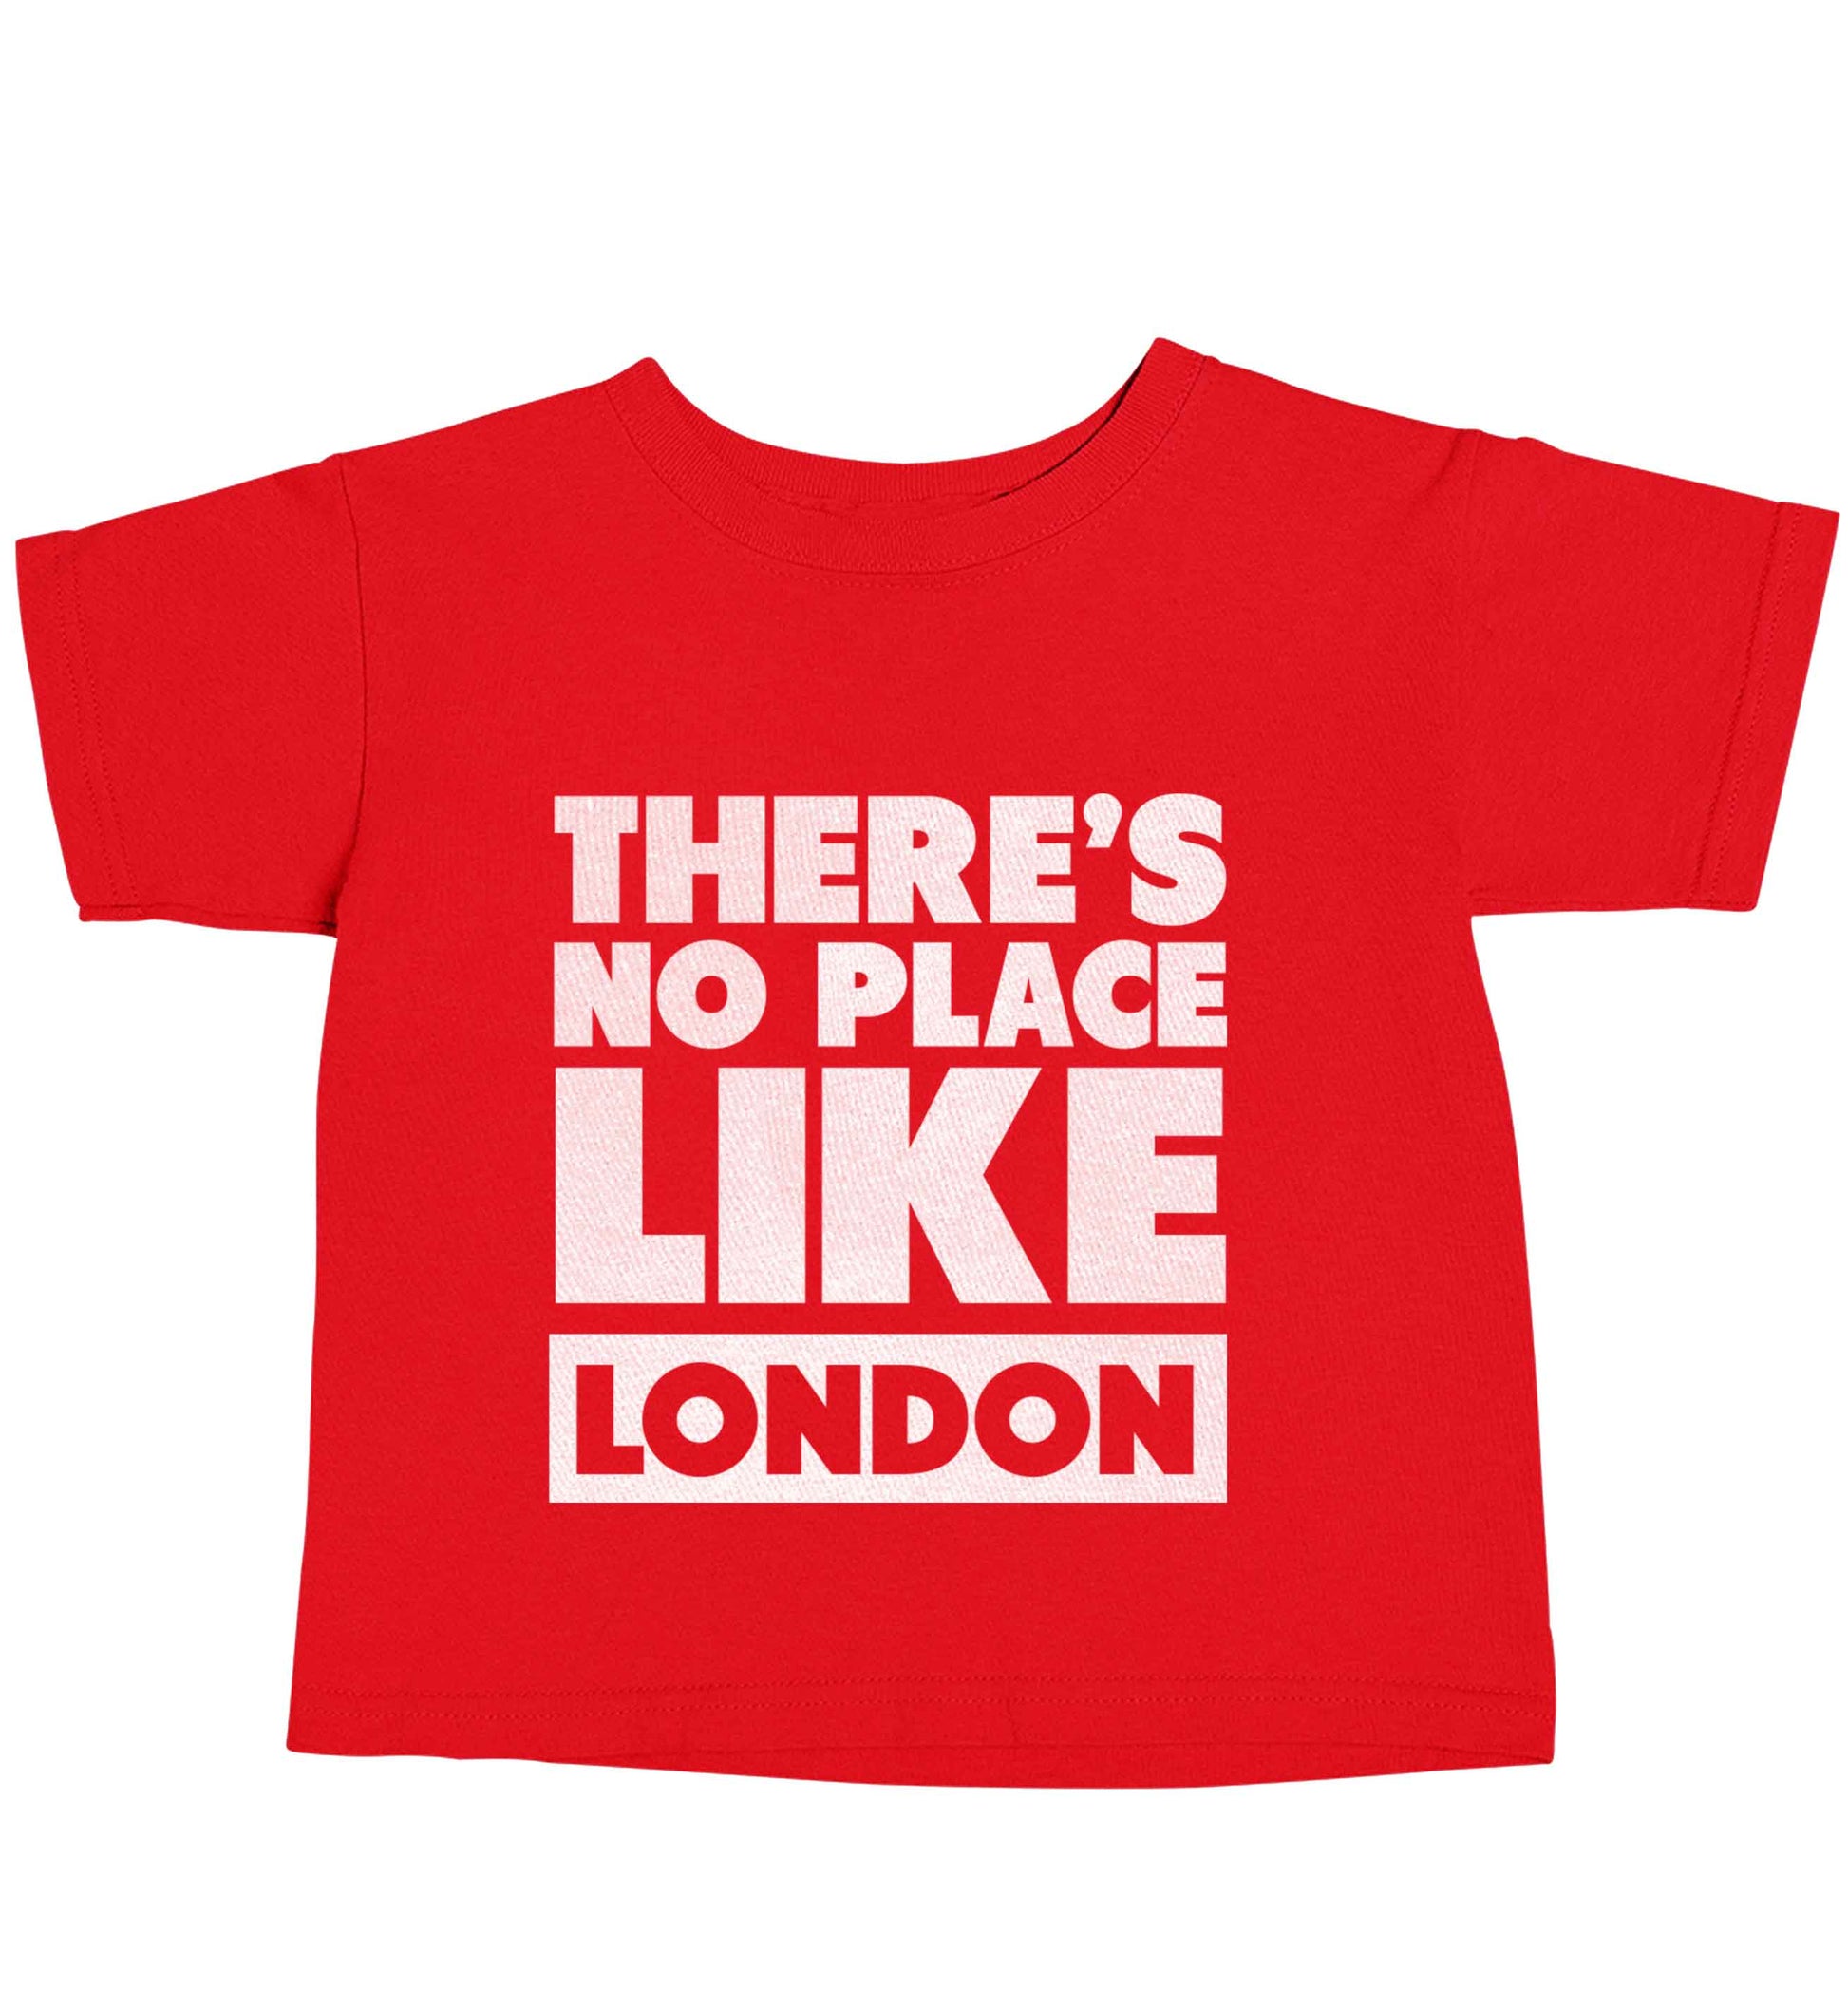 There's no place like England red baby toddler Tshirt 2 Years